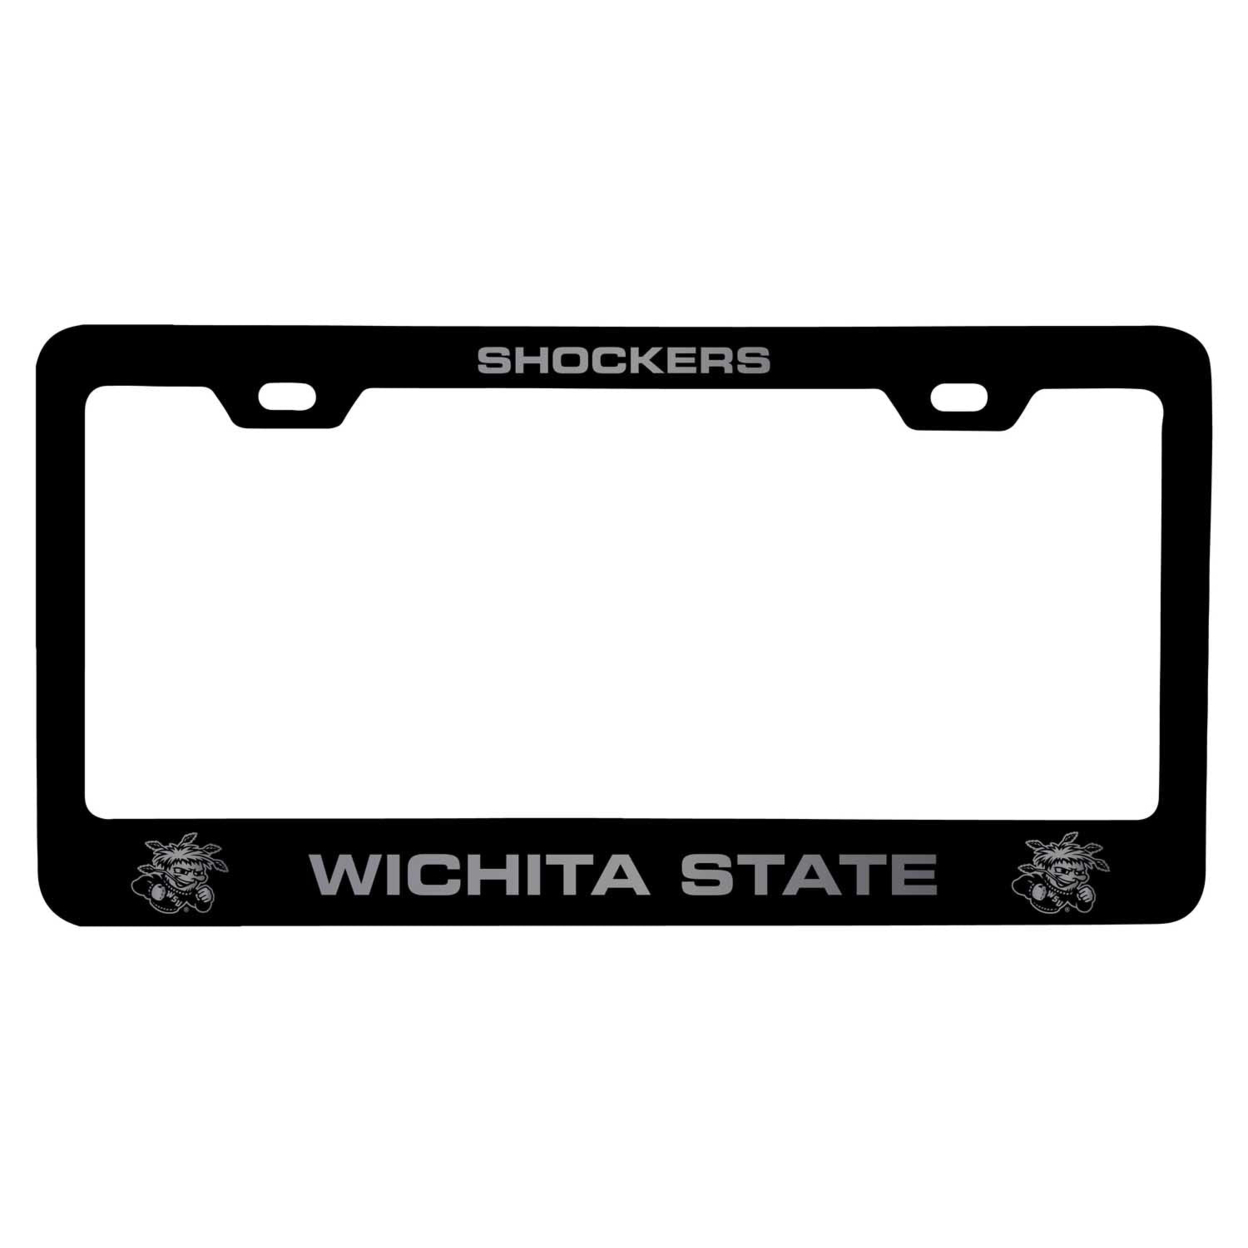 Wichita State Shockers Laser Engraved Metal License Plate Frame Choose Your Color